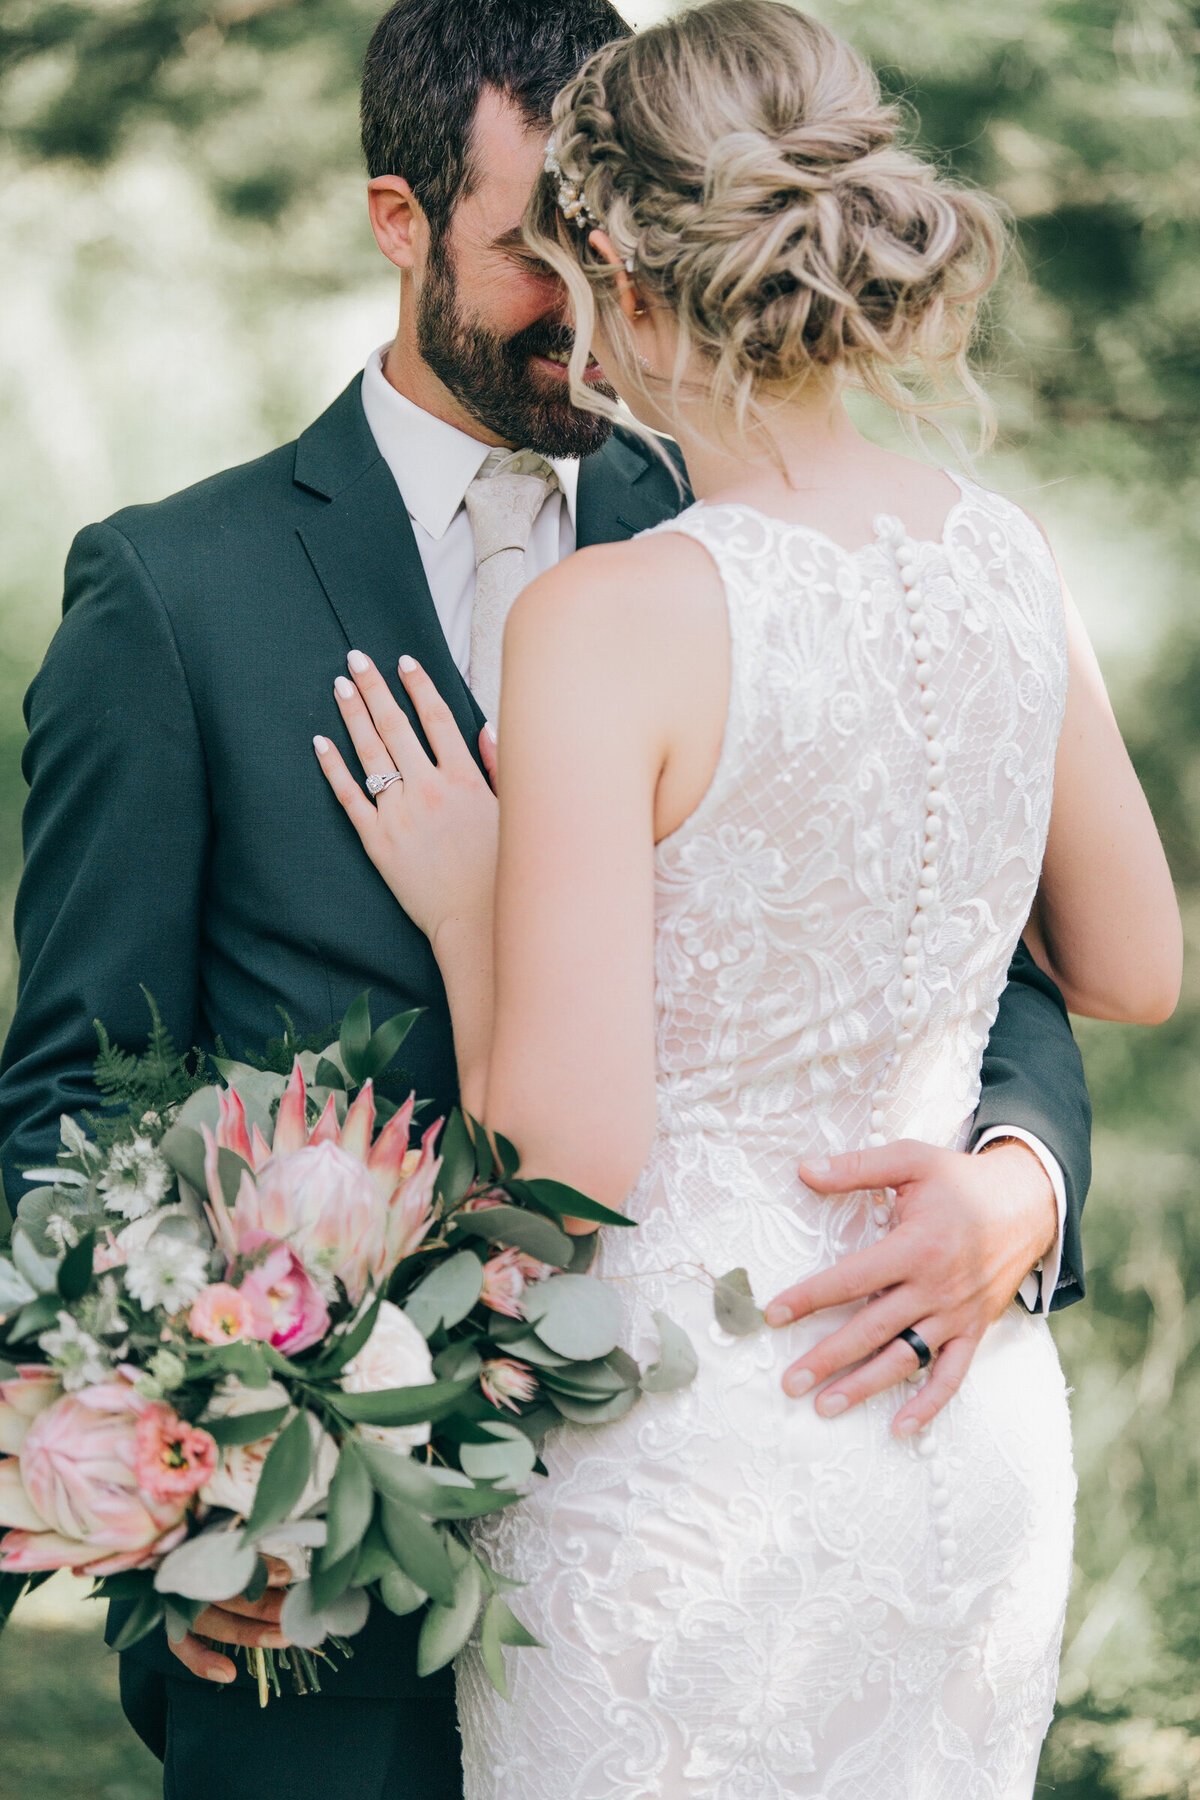 A beautiful detail photo of a bride and groom. The bride is wearing a stunning ivory wedding dress with a lace back and you can see that the groom is holding her whimsical bridal bouquet